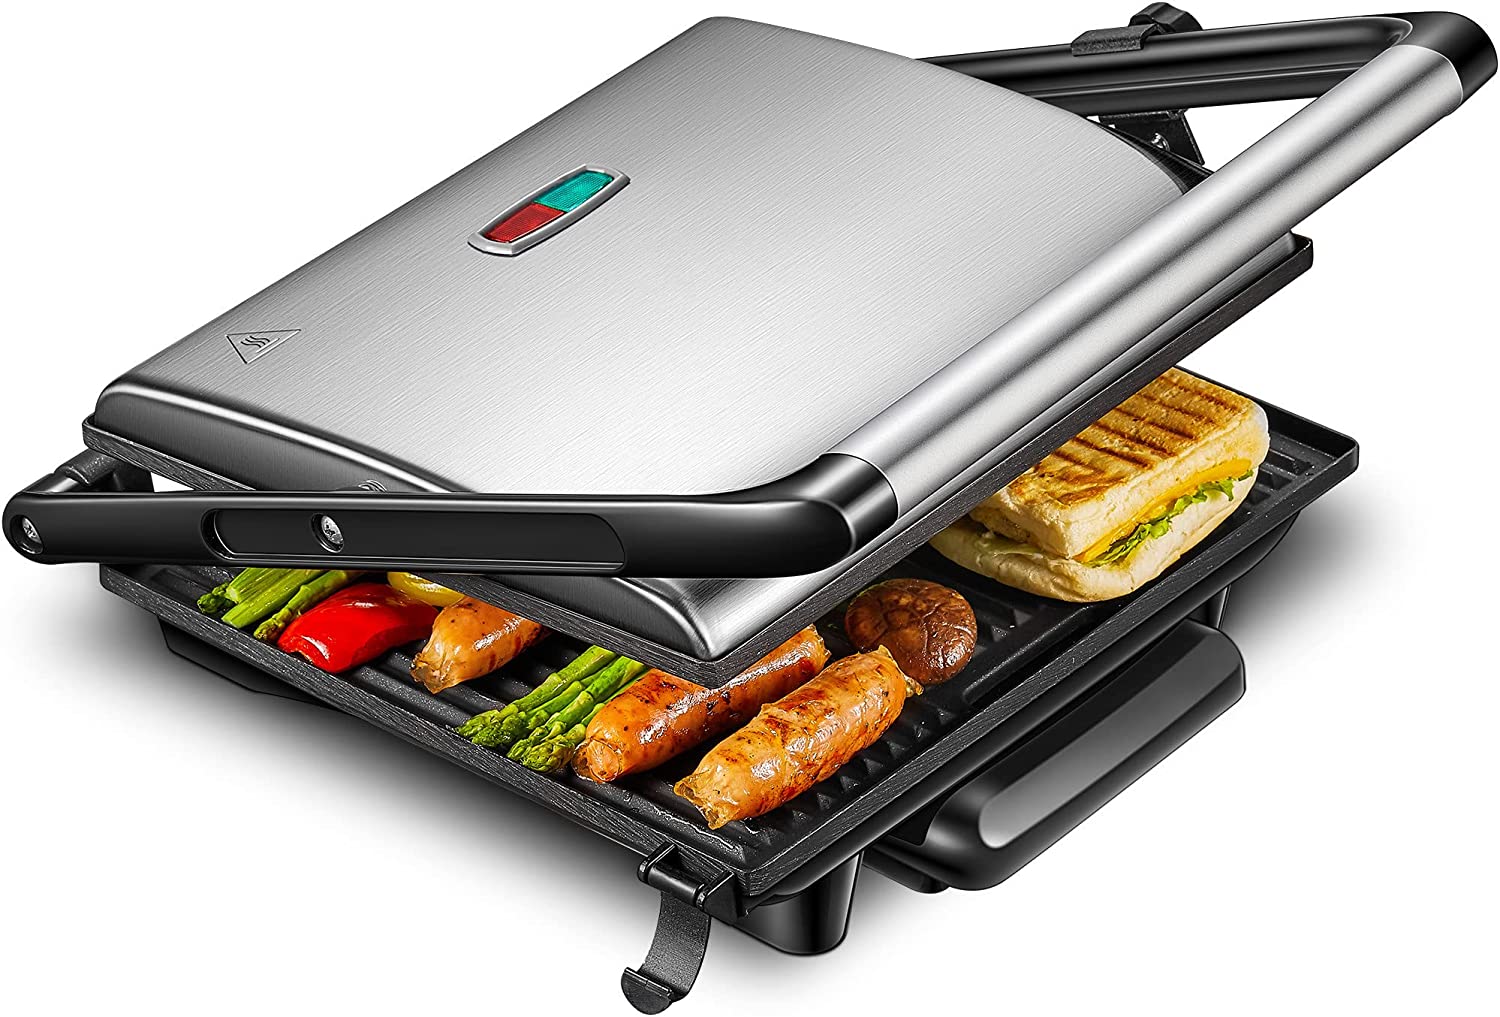 YYNN 2000 W Contact Grill Panini Maker, Sandwich Toaster, Electric Grill for Panini, Toasts and Steak Non-Stick Coated Plates 32 cm x 26 cm, Stainless Steel Housing, Silver